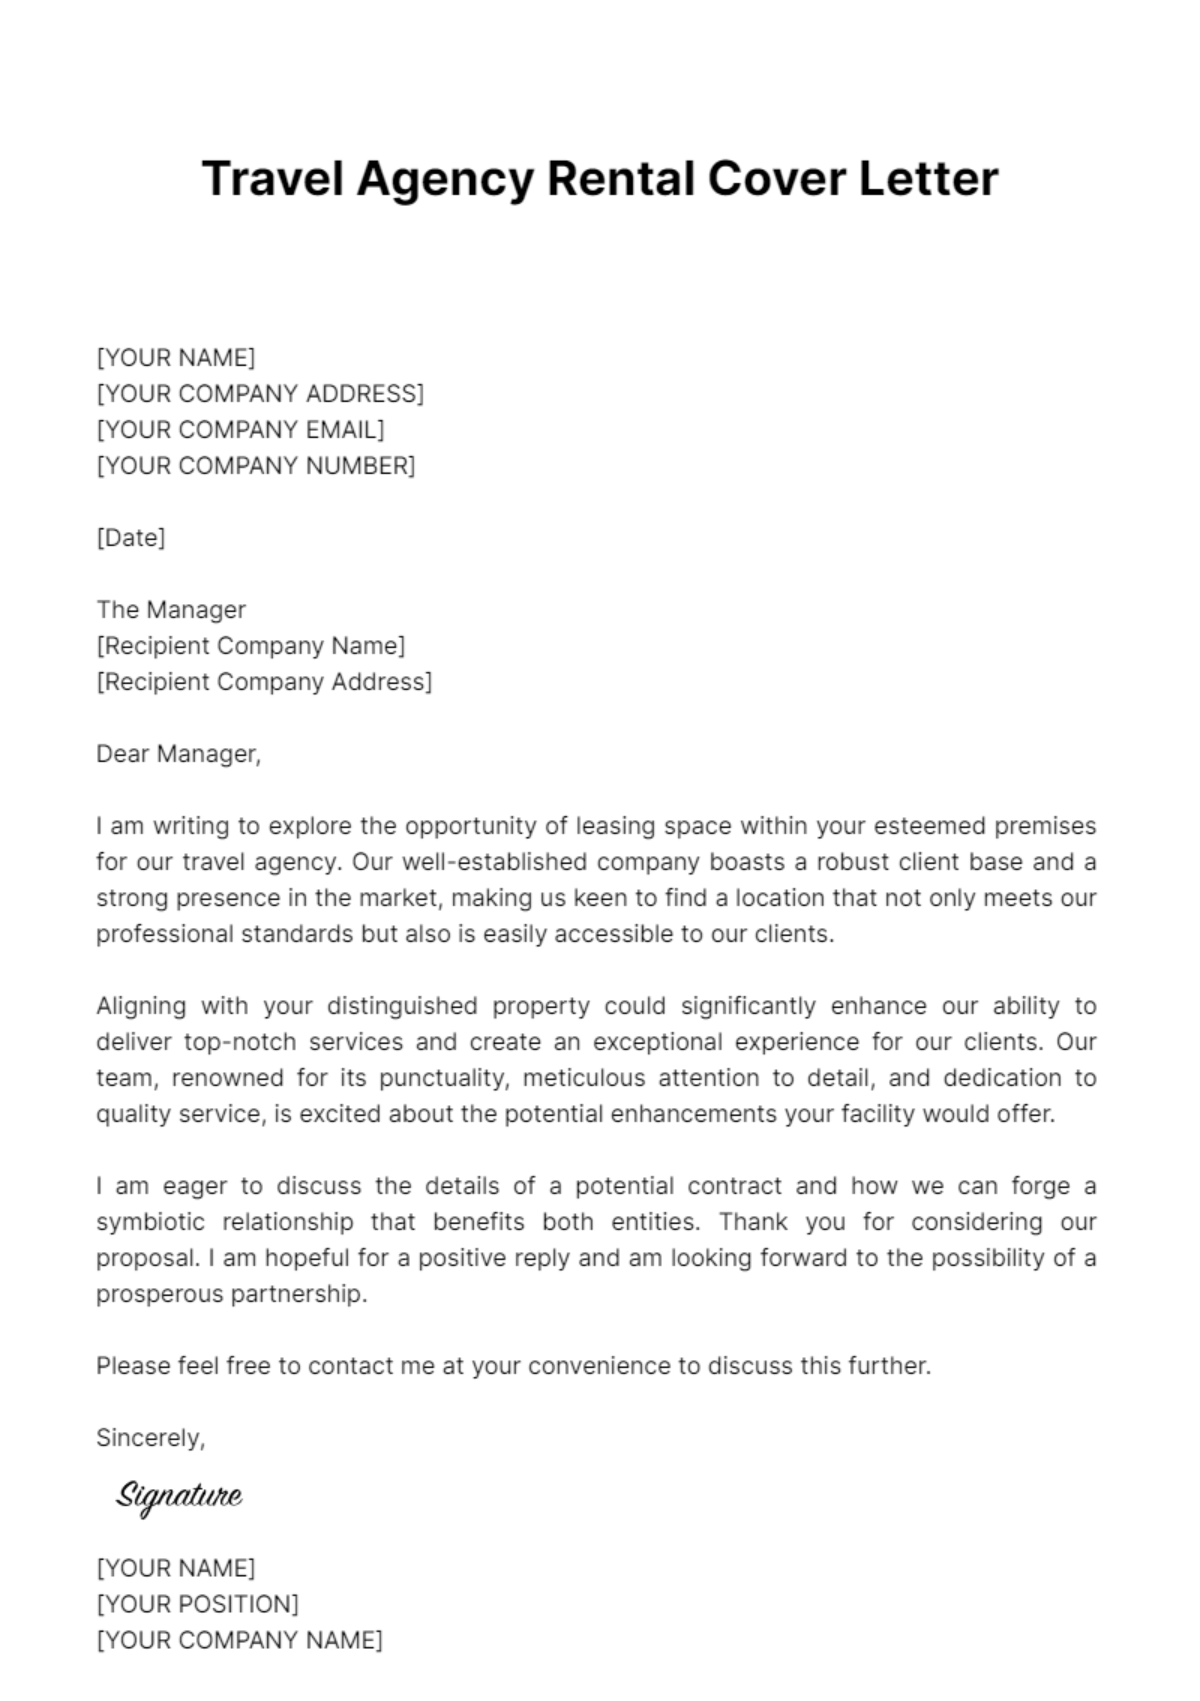 Travel Agency Rental Cover Letter Template